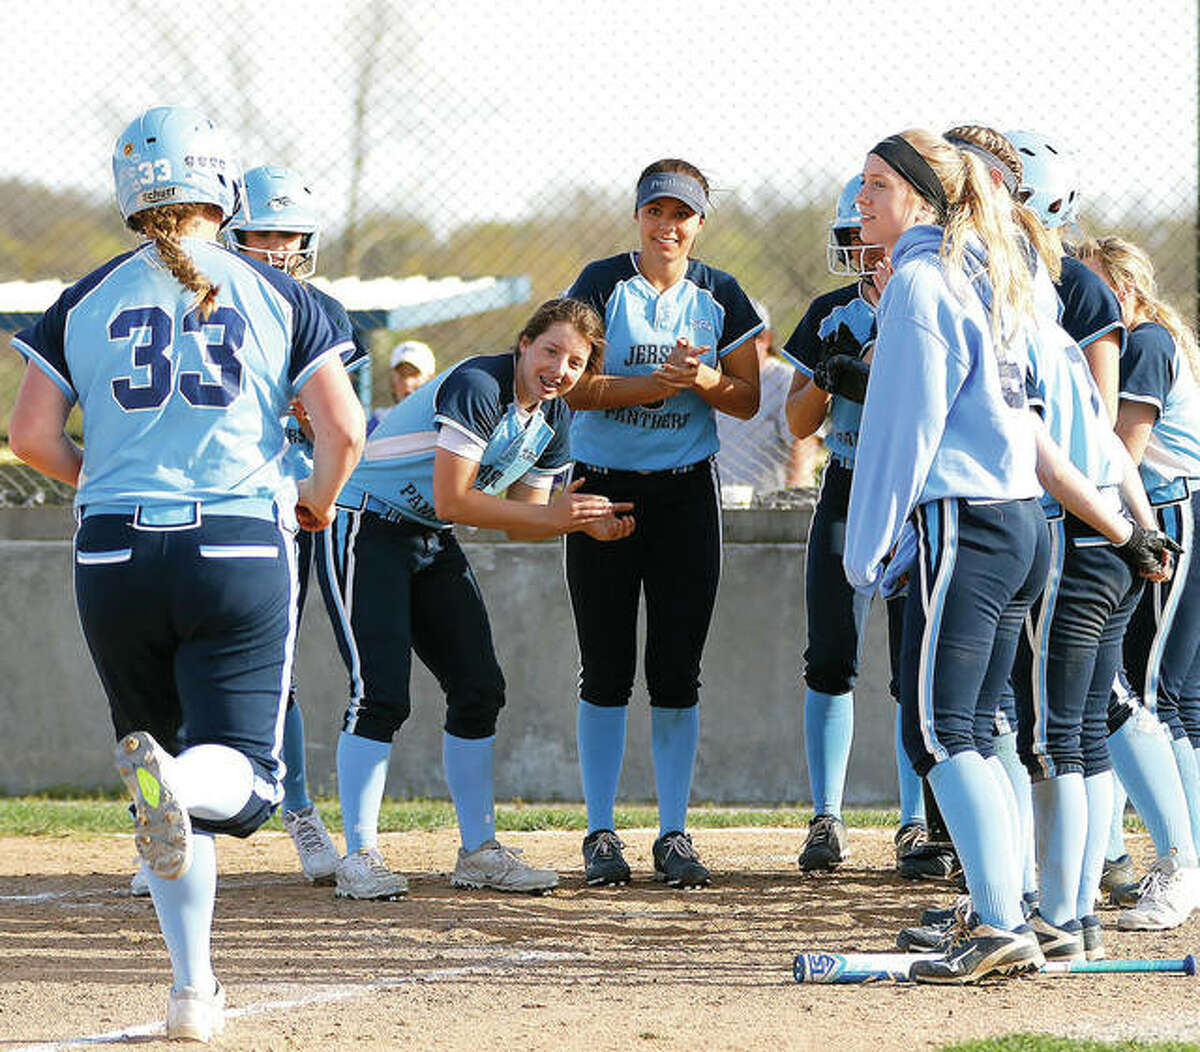 Jersey’s Bethany Muenstermann (33) is greeted by teammates as she heads to home plate after hitting a three-run home run Wednesday in the Panthers’ Mississippi Valley Conference opener against Civic Memorial at the Bethalto Sports Complex. Muenstermann also had a double and went 3-for-6 with five RBIs for the Panthers, who ran their record to 10-0 overall and 1-0 in the MVC with a resounding 22-10 victory. Also for CM, Ashton Tewell went 5-for-5 with a double and three RBIs, Caitlyn Connell was 5-for-5 with an RBI, Chelsea Maag was 4-for-5 with a homer, a double and three RBIs, Peyton Tisdale was 3-for-4 with four RBI and Libby Munsterman was 3-for-5 with a double and two RBIs. Visit thetelegraph.com for further coverage.